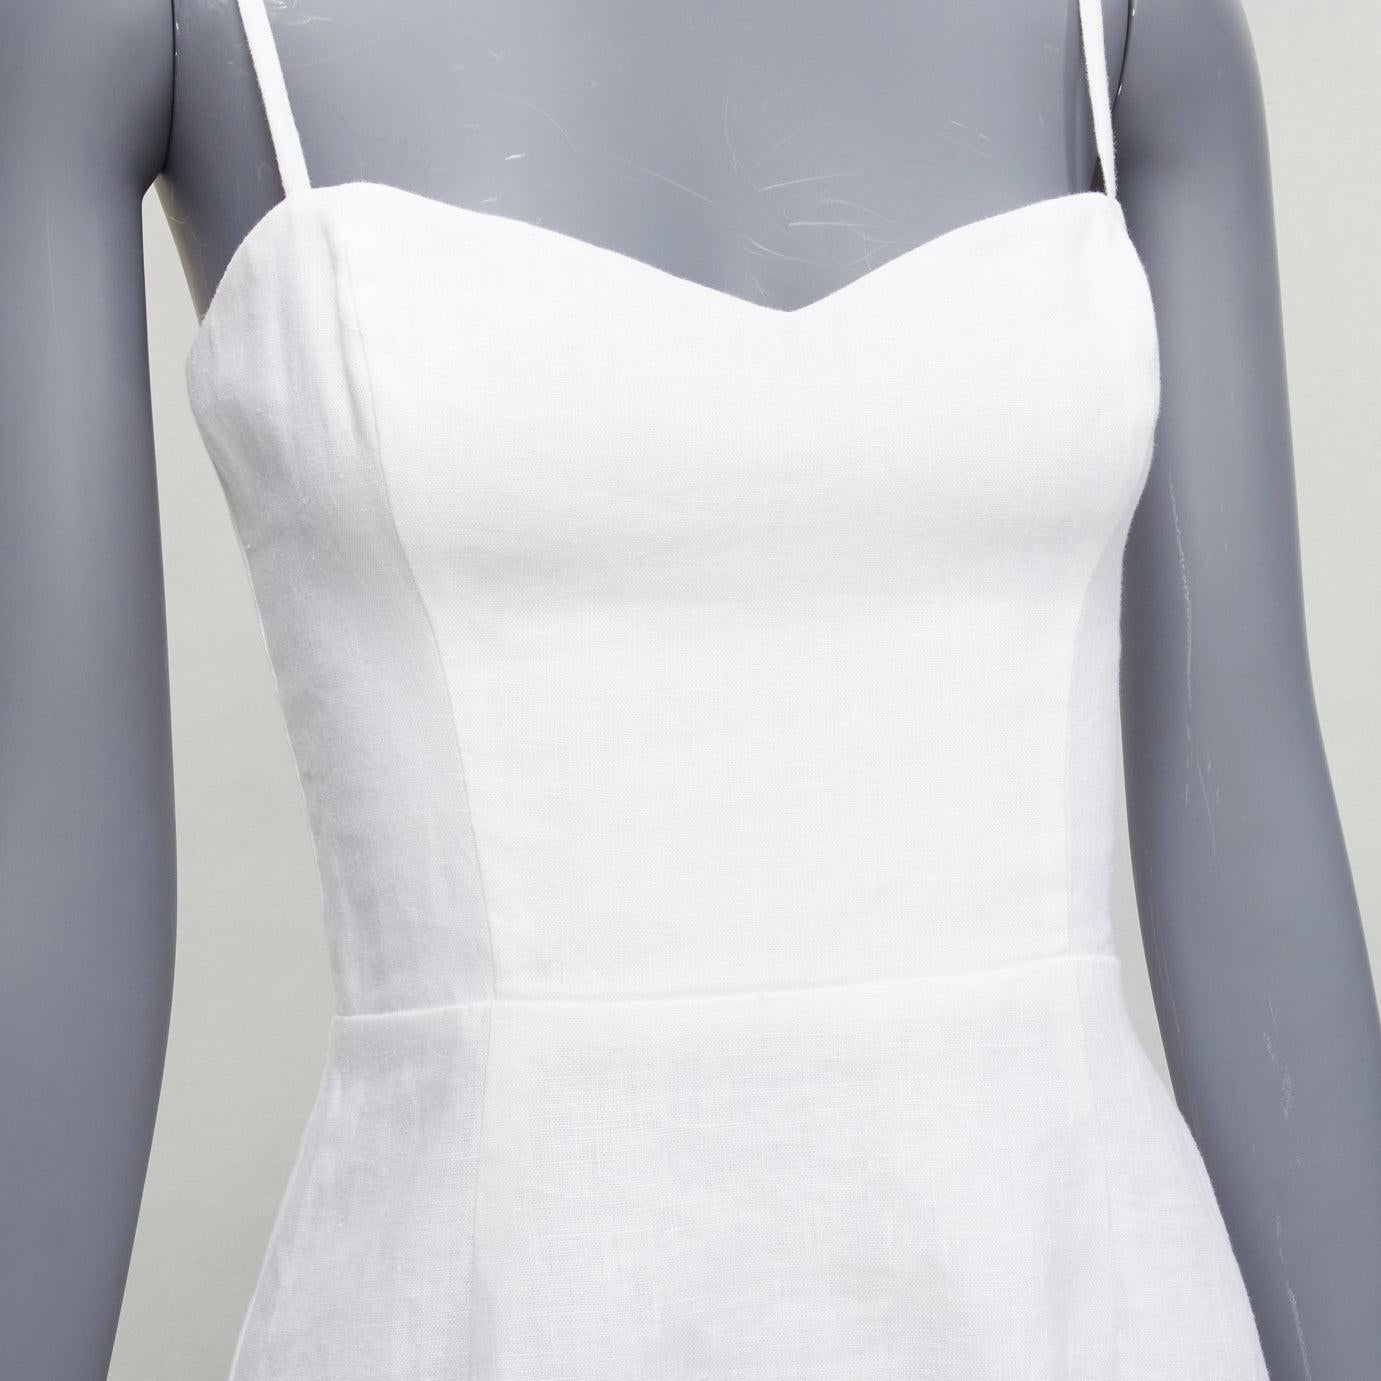 REFORMATION white sweetheart neckline strappy fitted mini dress S
Reference: SNKO/A00398
Brand: Reformation
Material: Linen
Color: White
Pattern: Solid
Closure: Zip
Lining: White Fabric
Extra Details: Center back strap. Form fitting.
Made in: